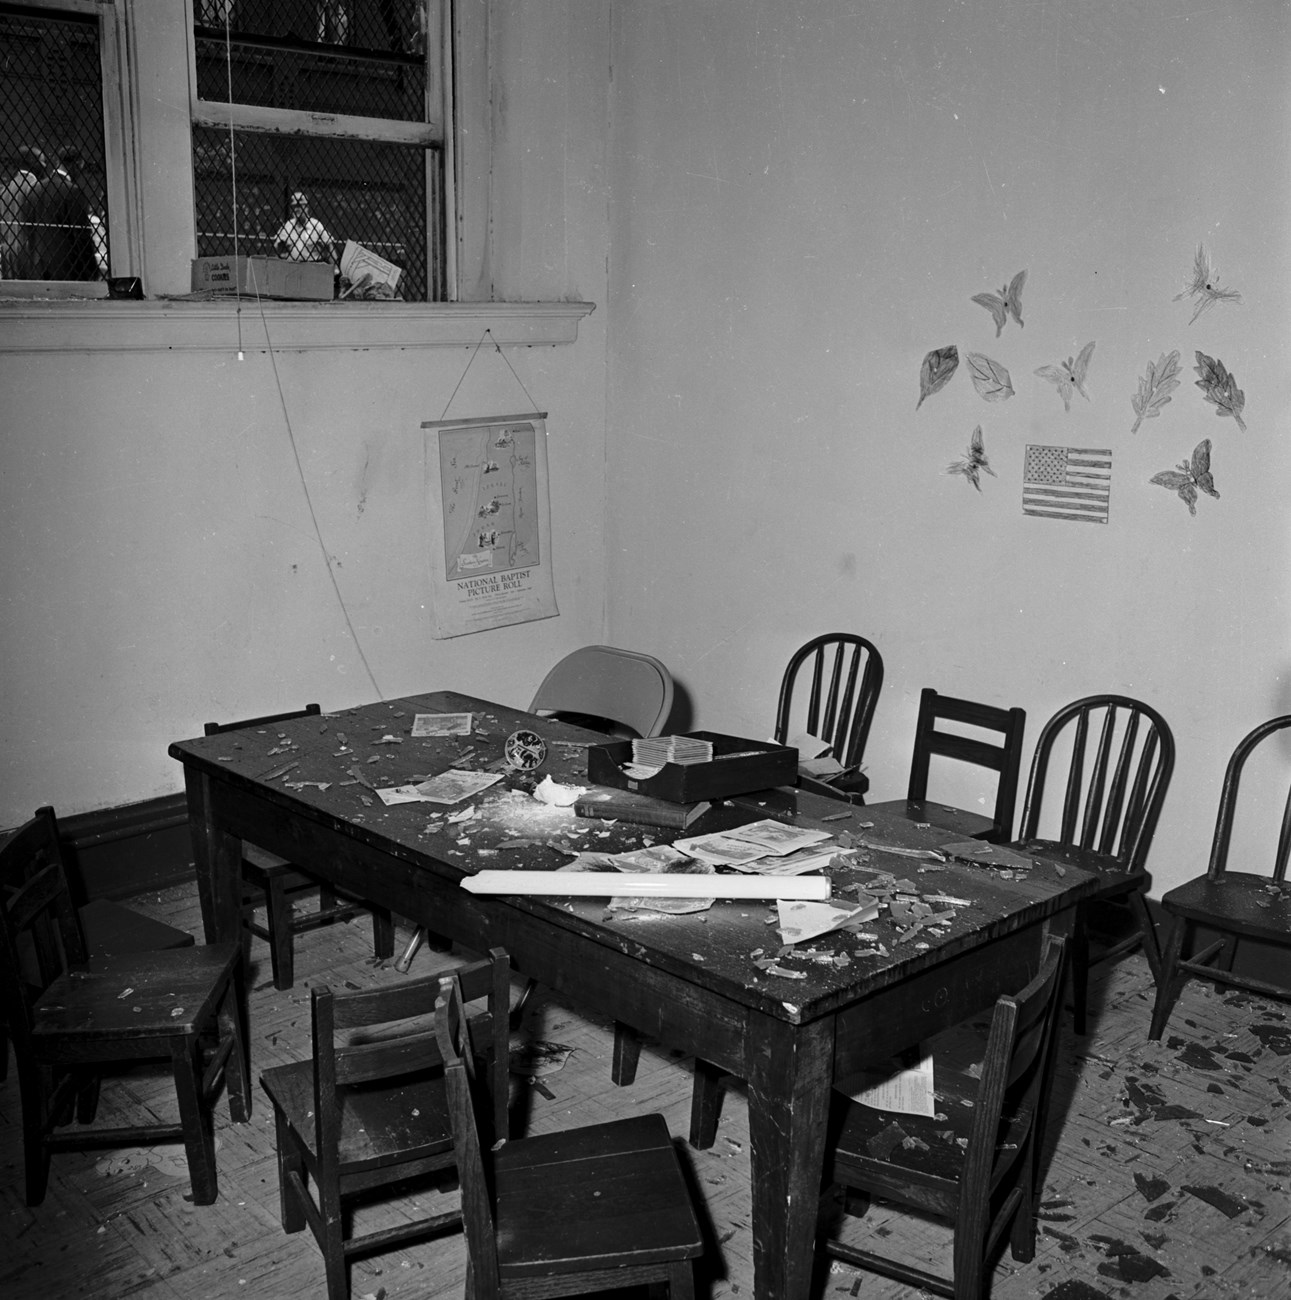 Debris and damage in a children’s classroom at 16th Street Baptist Church in Birmingham, Alabama, after the building was bombed.